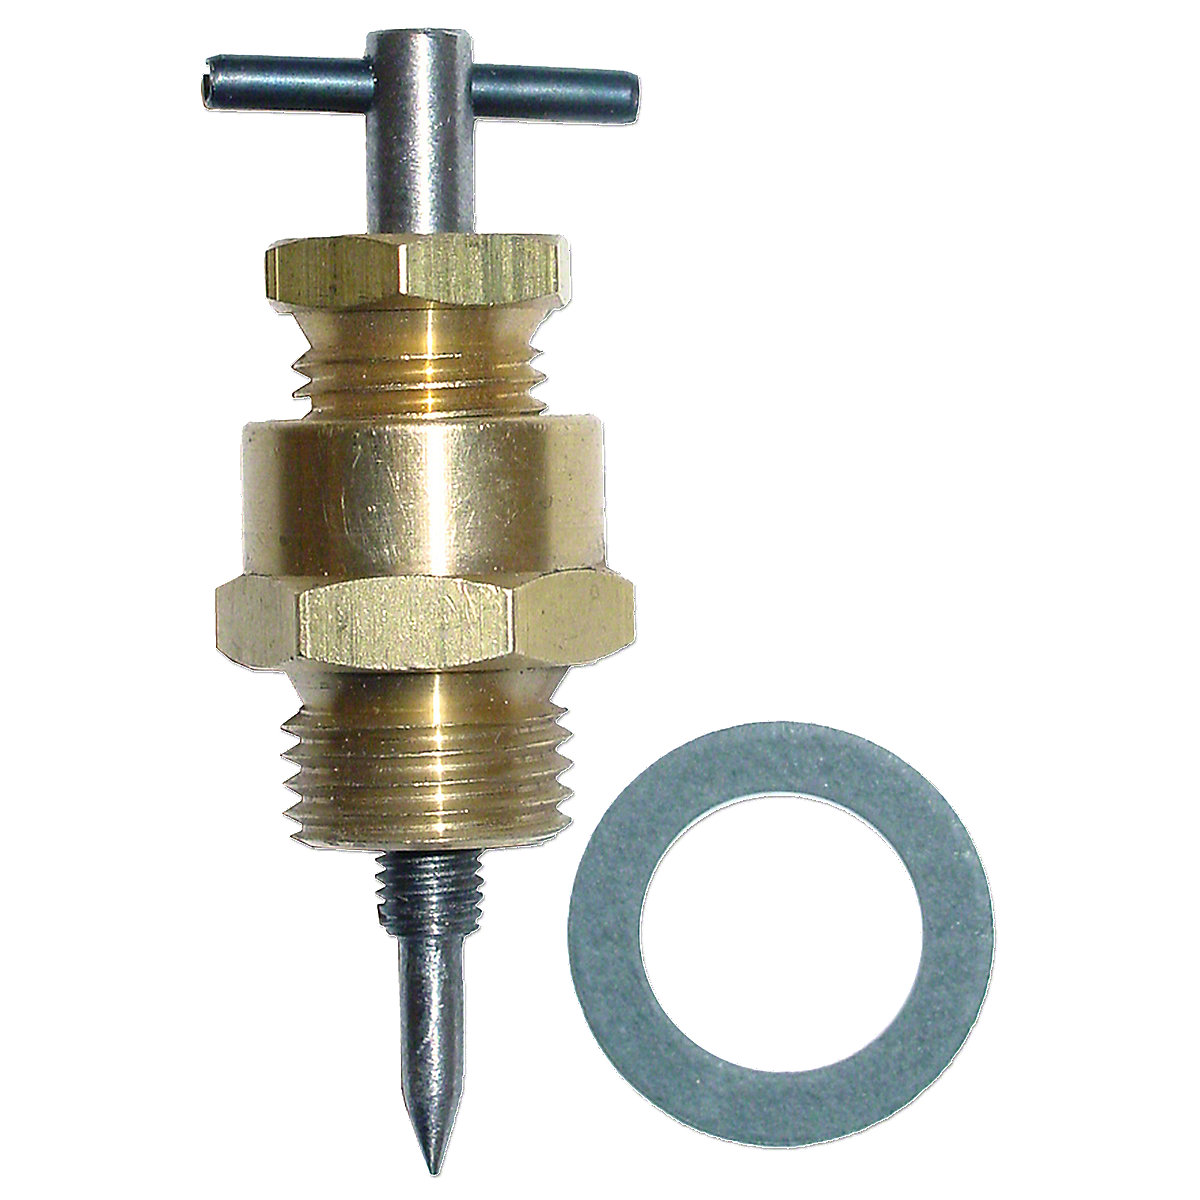 Zenith Adjustable Load Nozzle Assembly For Carbs With End Mounted Load Nozzle Or Solenoid For Massey Ferguson And Massey Harris Tractors.